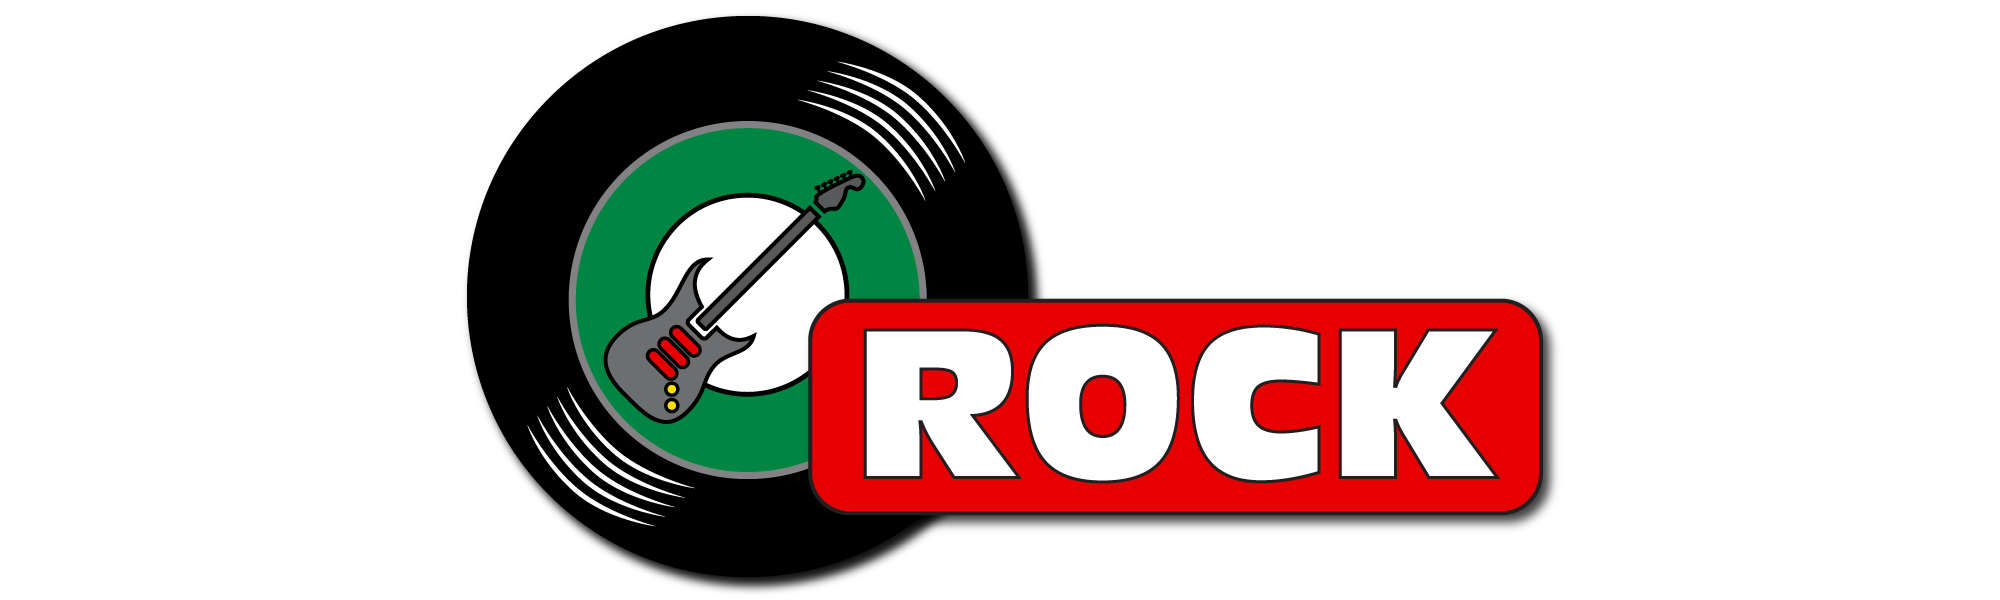 Rock Vinyl Records & CDs For Sale | Swaggie Records